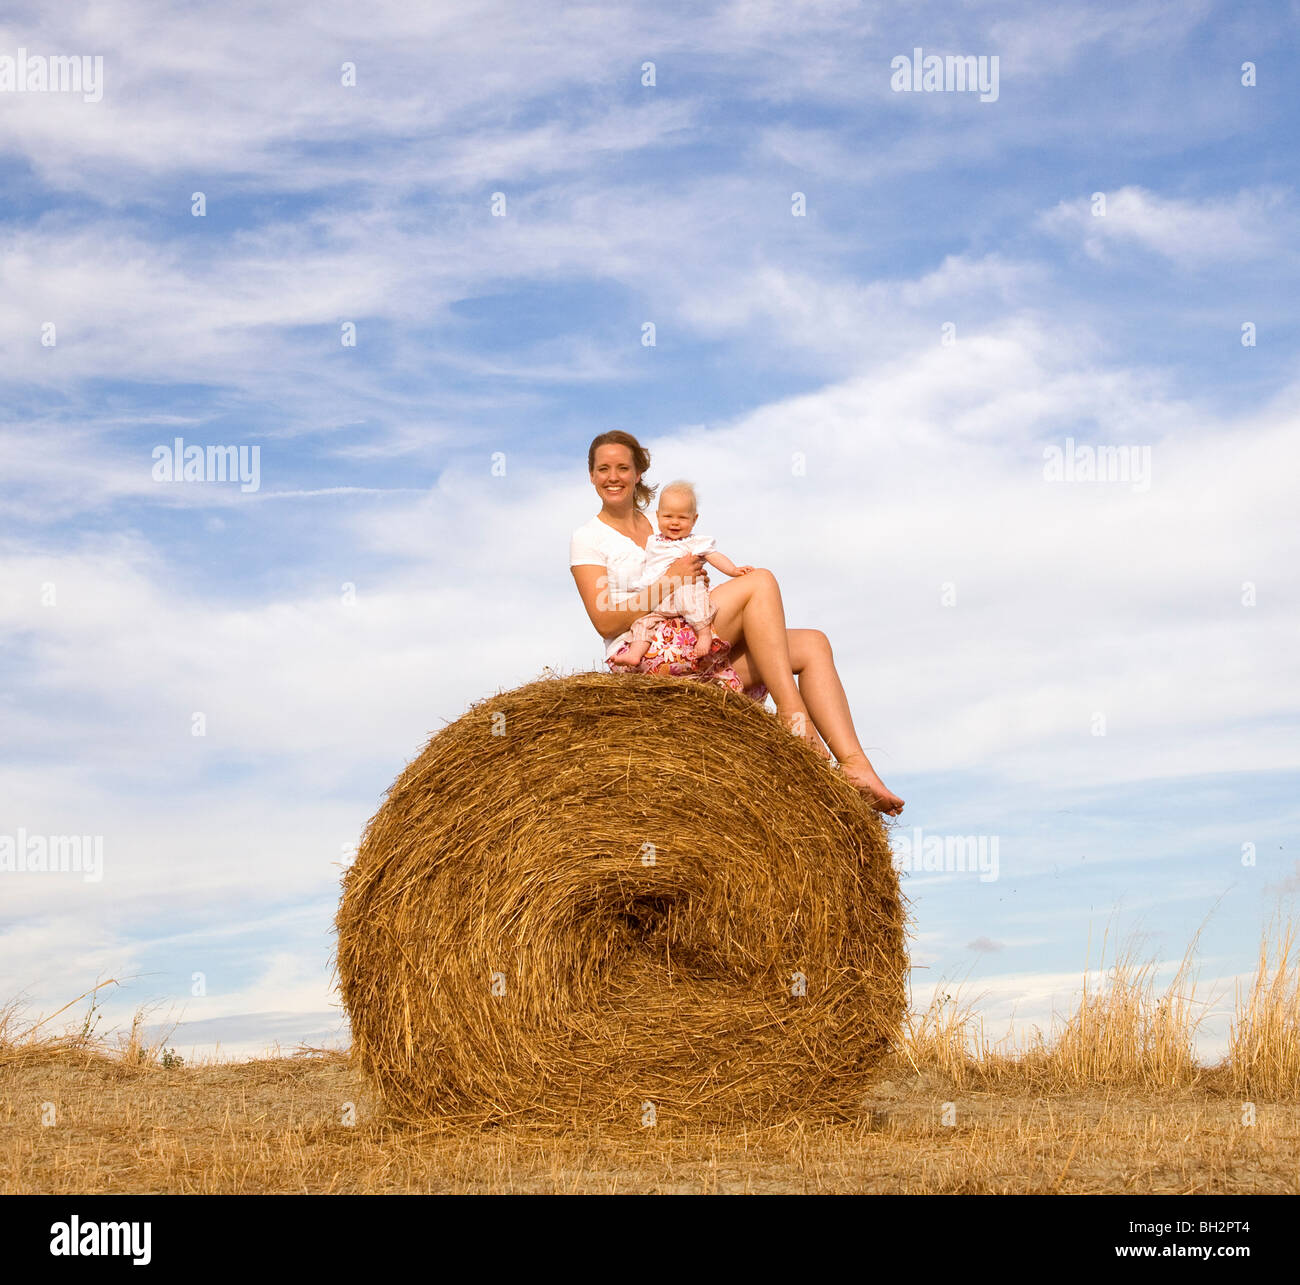 woman holding baby on hay bale Stock Photo